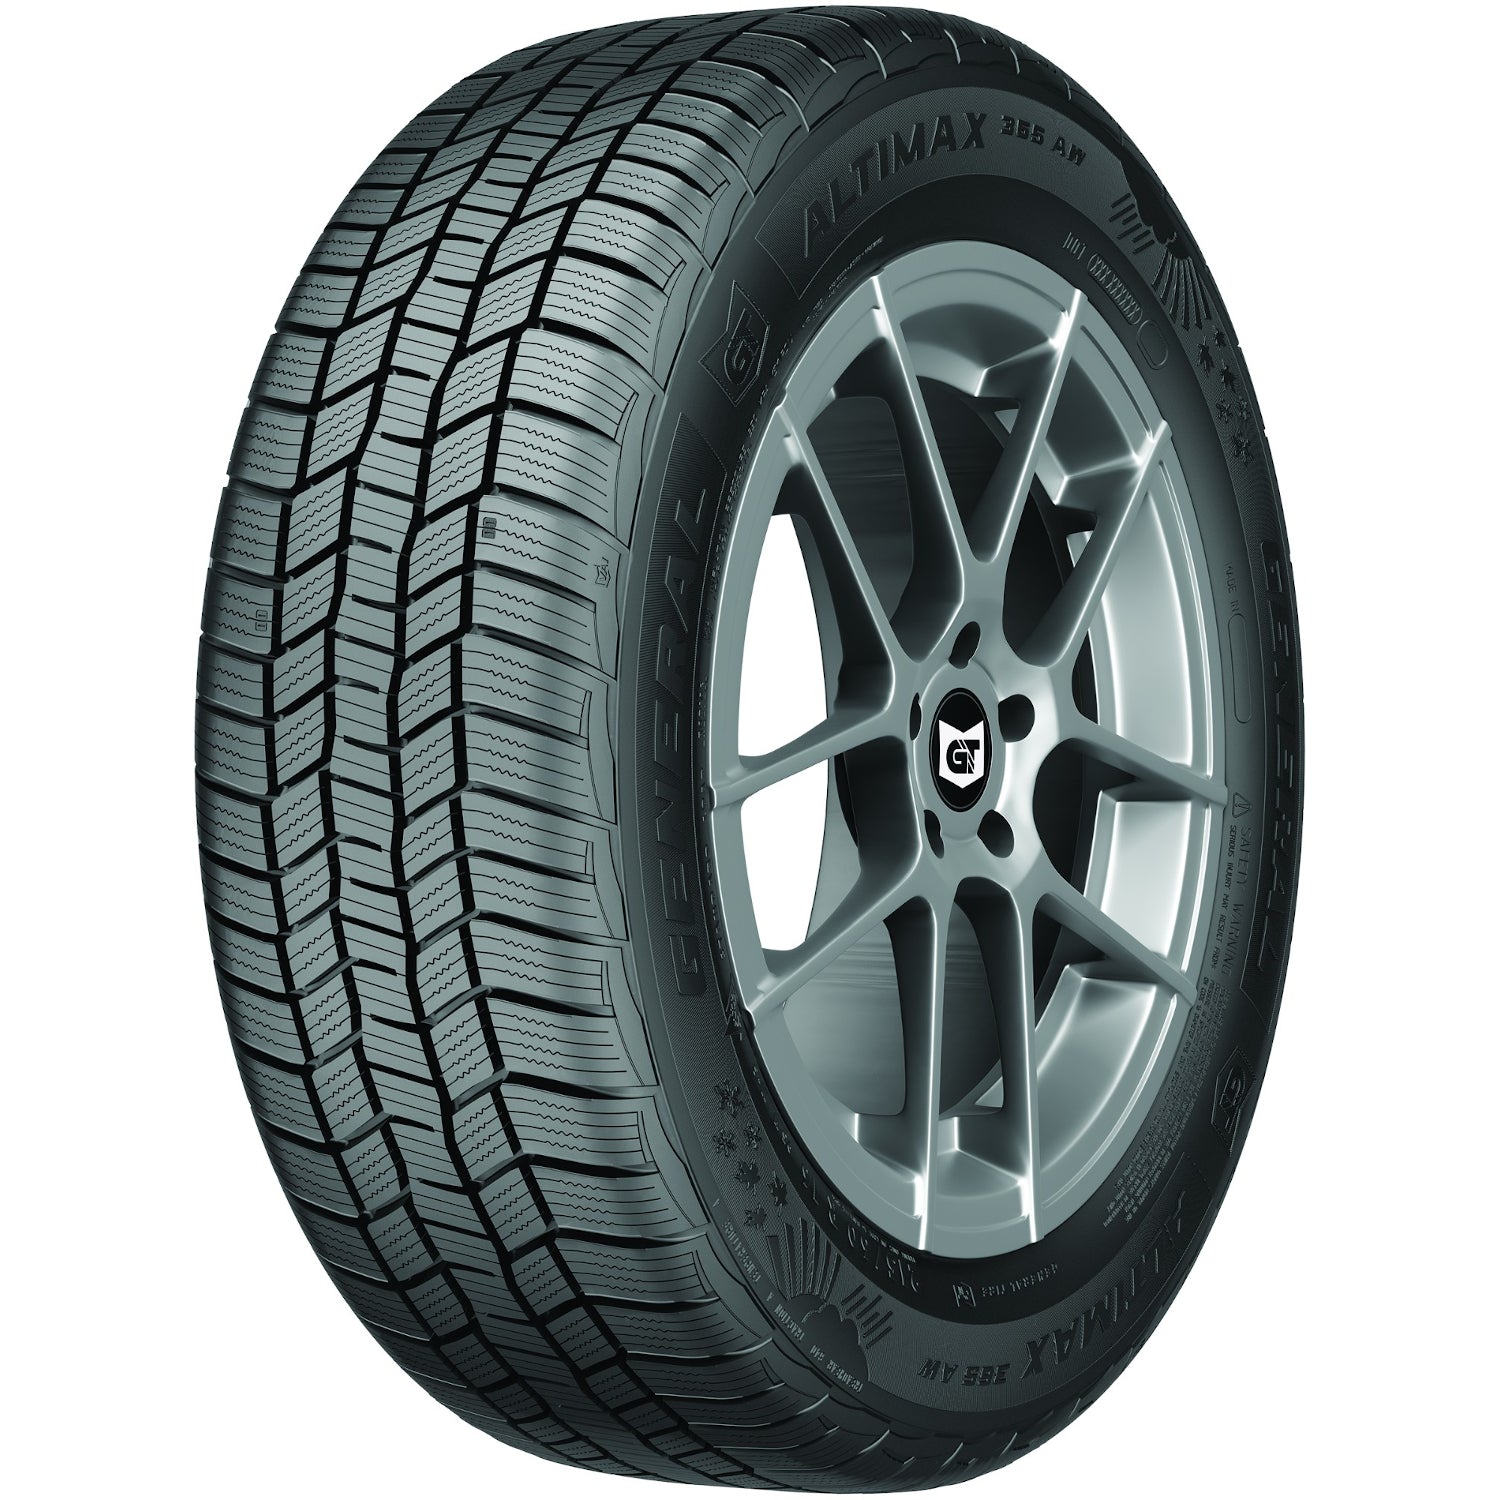 GENERAL ALTIMAX 365AW 225/55R18 (27.7X8.9R 18) Tires